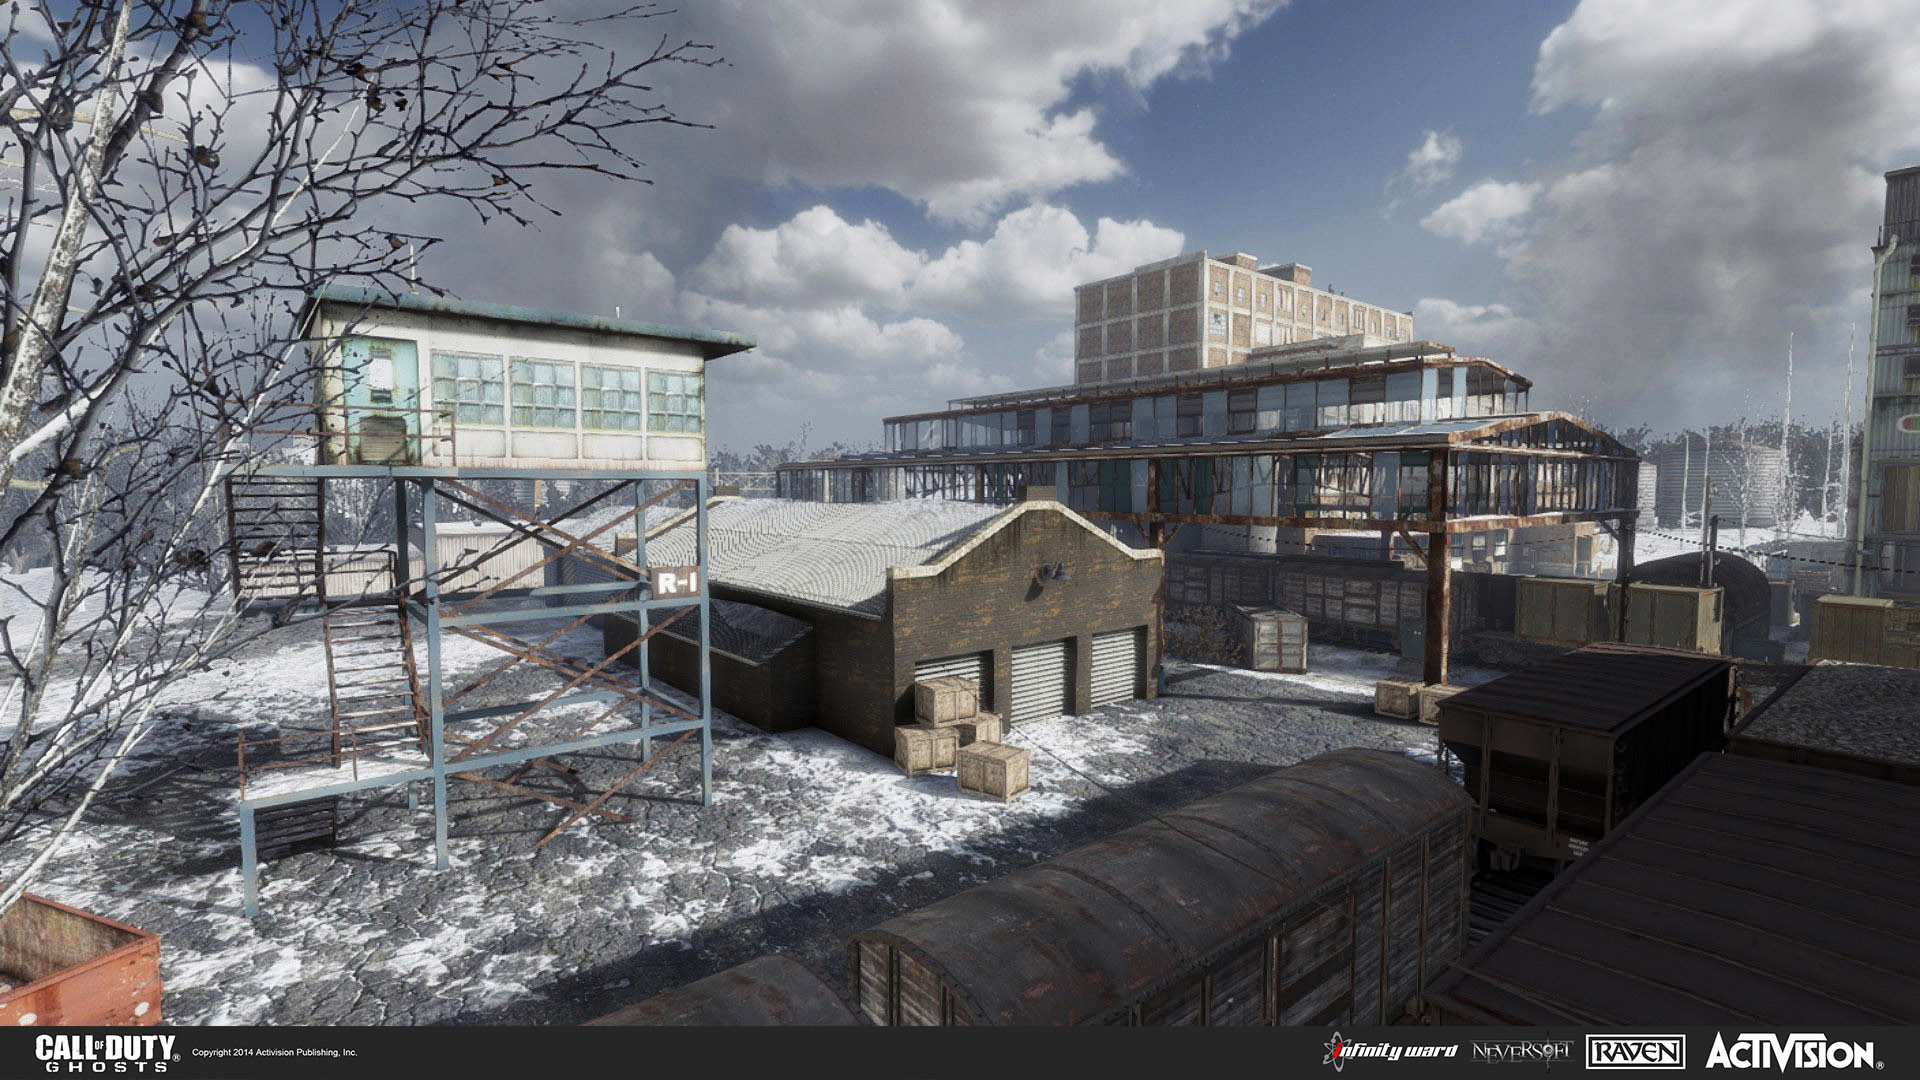 ArtStation - Call of Duty: Ghost Multiplayer Map - Freight